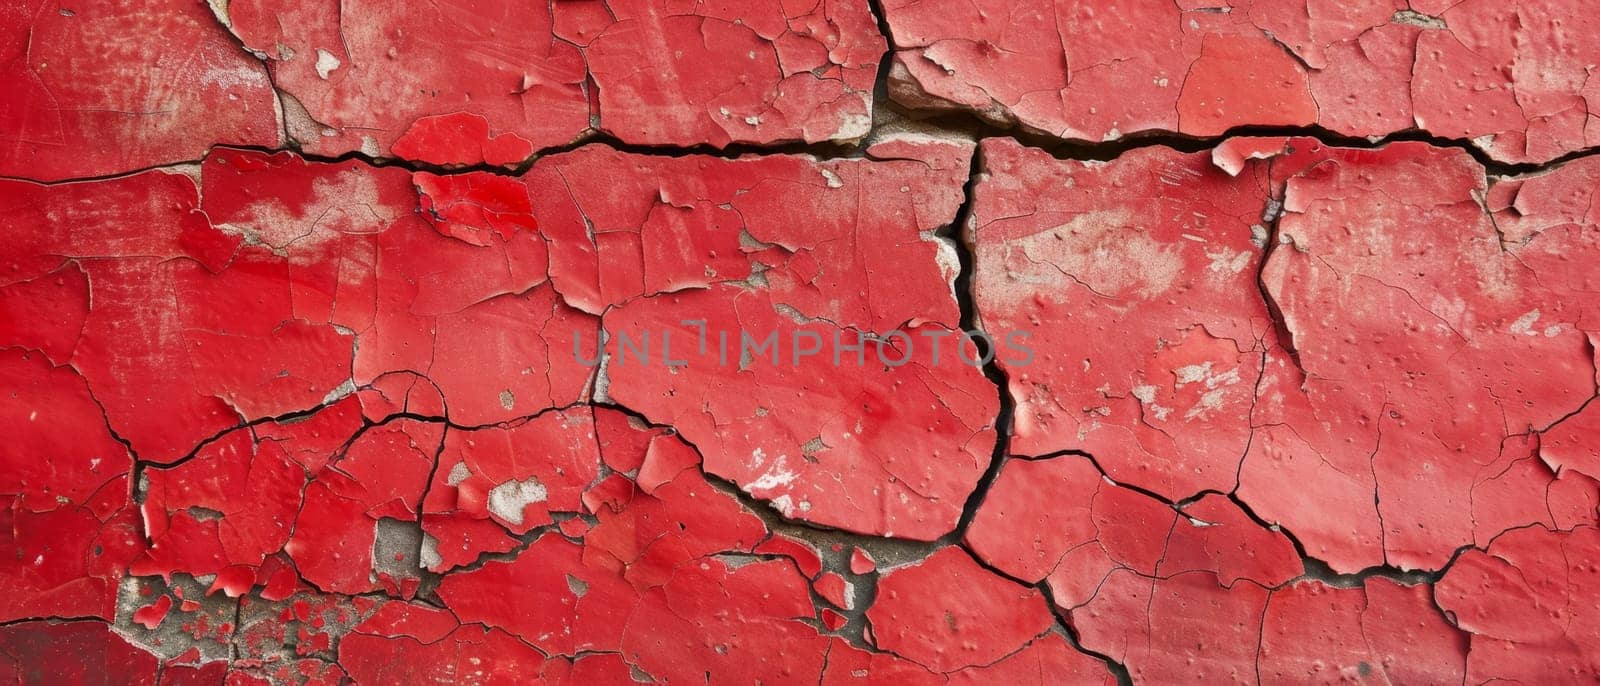 The concrete wall's peeling red paint creates an intriguing texture, a reflection of the urban landscape's ever-changing face. The red tones vary in intensity